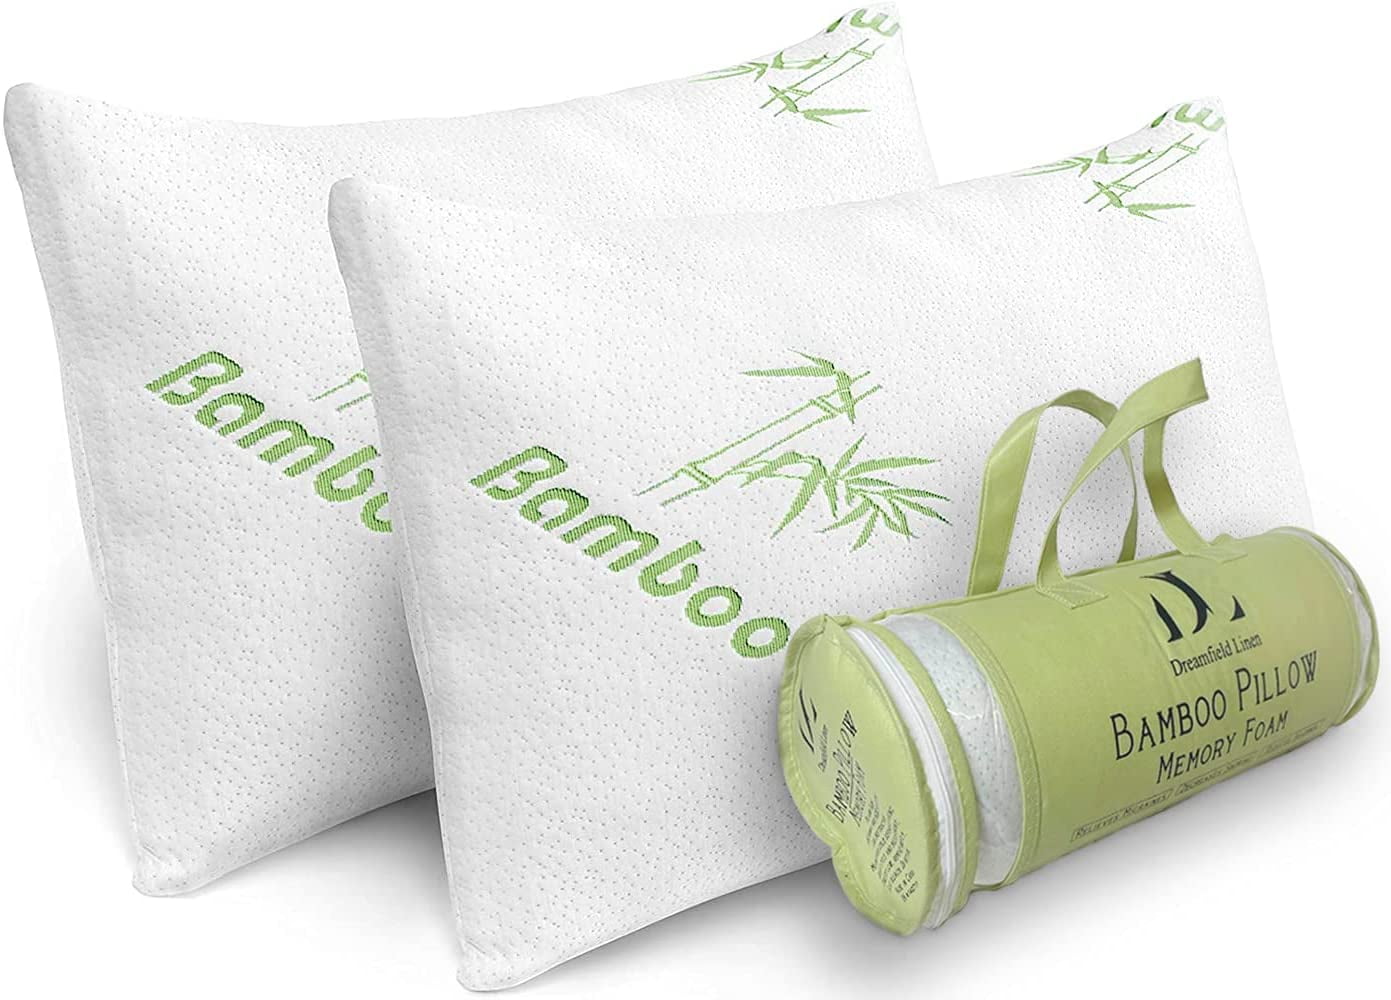 Dream Bamboo Pillow – Lincove